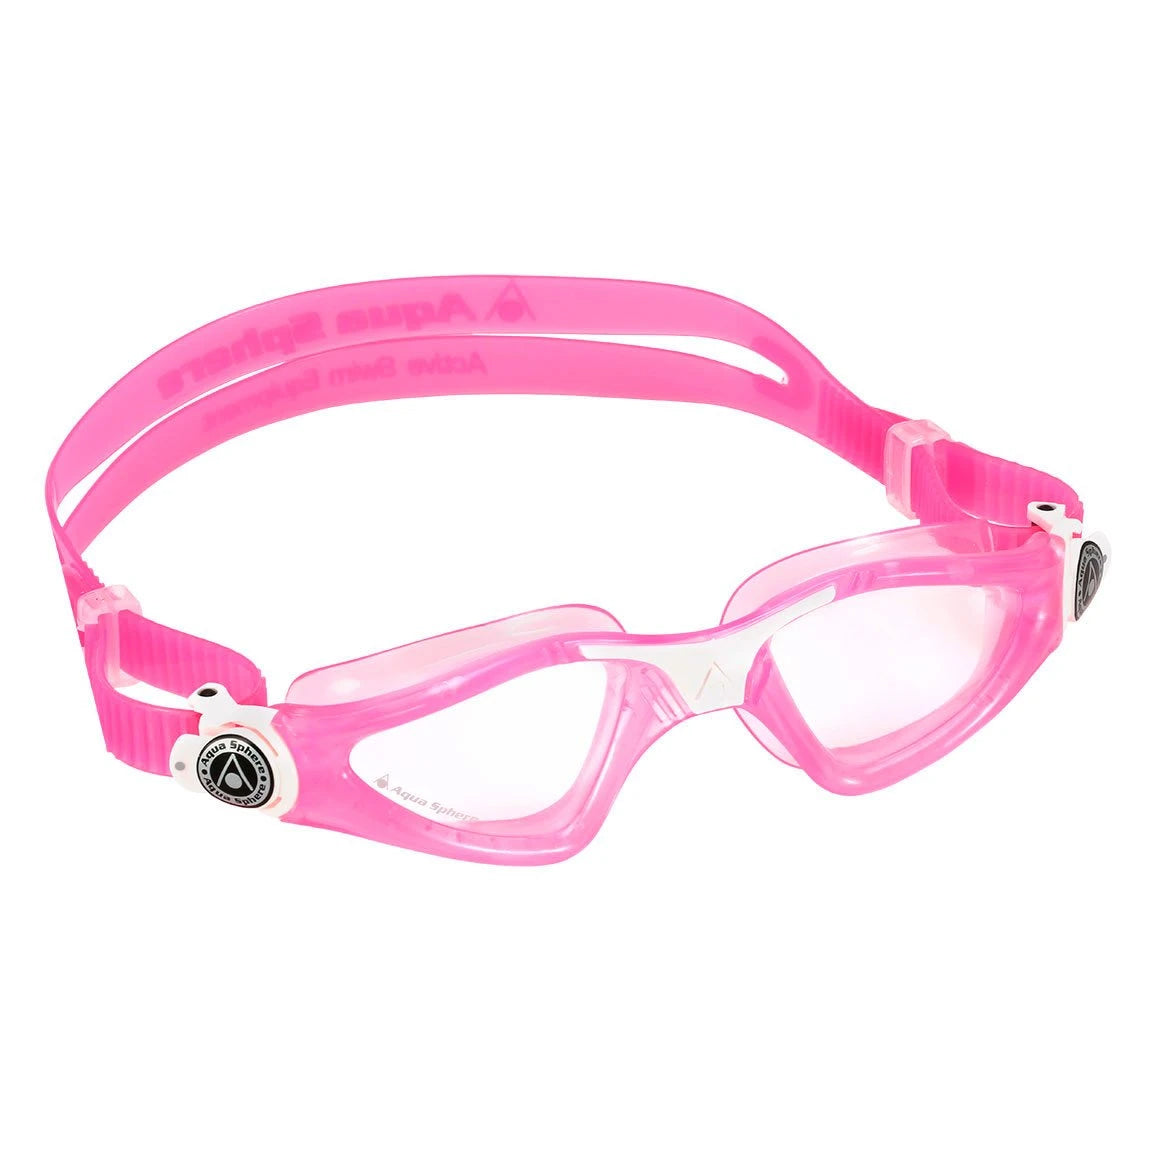 Aqua Sphere Moby Kids Goggle Clear/Pink/White